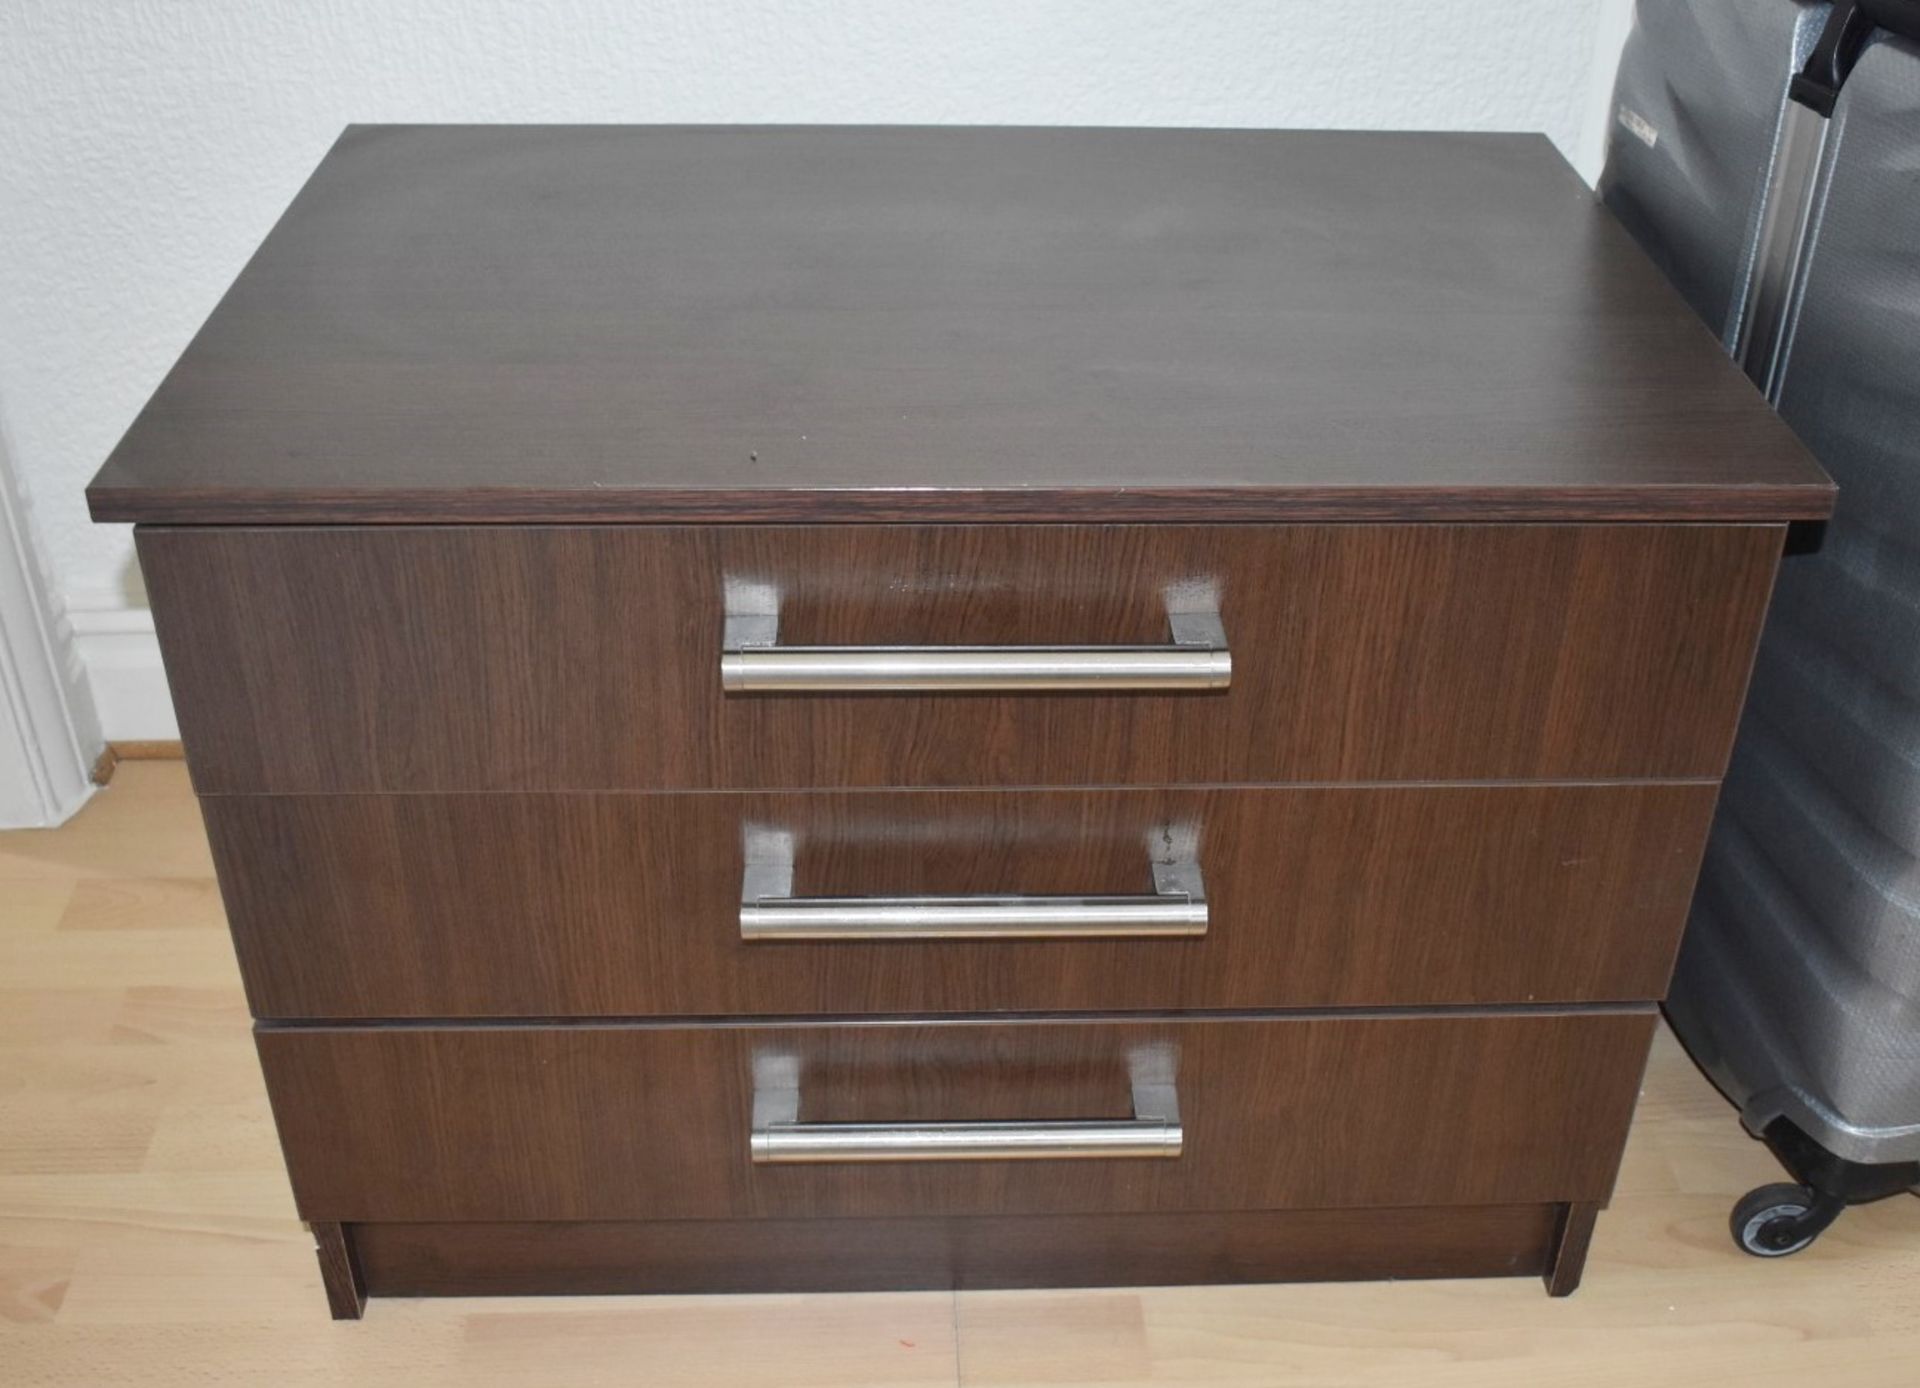 1 x Chest of Drawers With Walnut Finish - Dimensions: H60 x W81 x D54 cms - No VAT on the Hammer - - Image 4 of 5